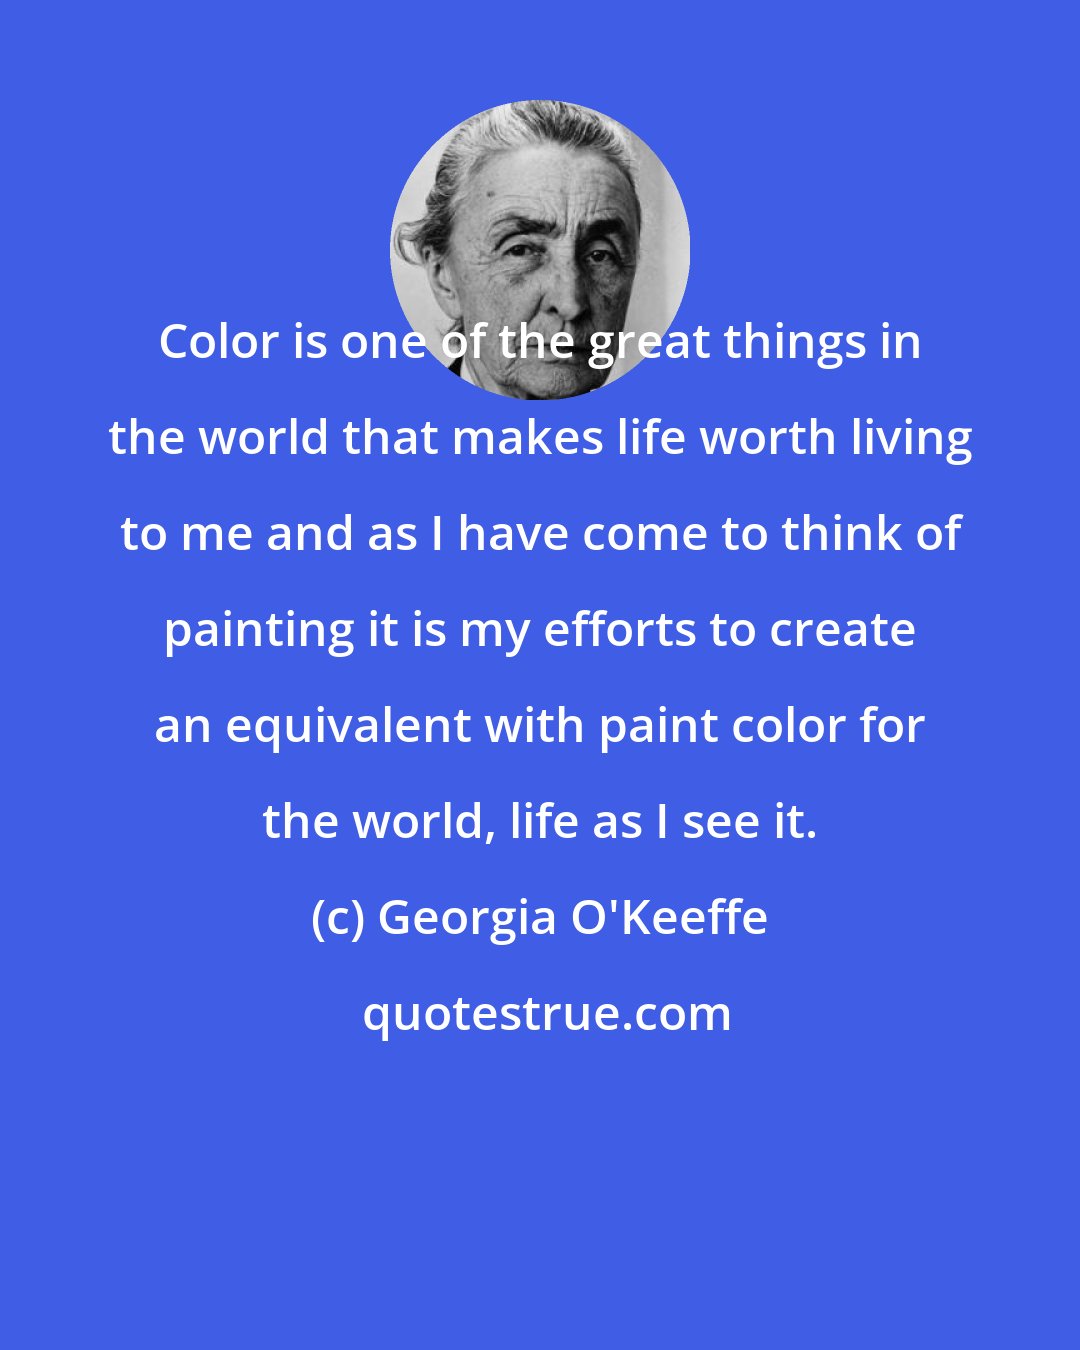 Georgia O'Keeffe: Color is one of the great things in the world that makes life worth living to me and as I have come to think of painting it is my efforts to create an equivalent with paint color for the world, life as I see it.